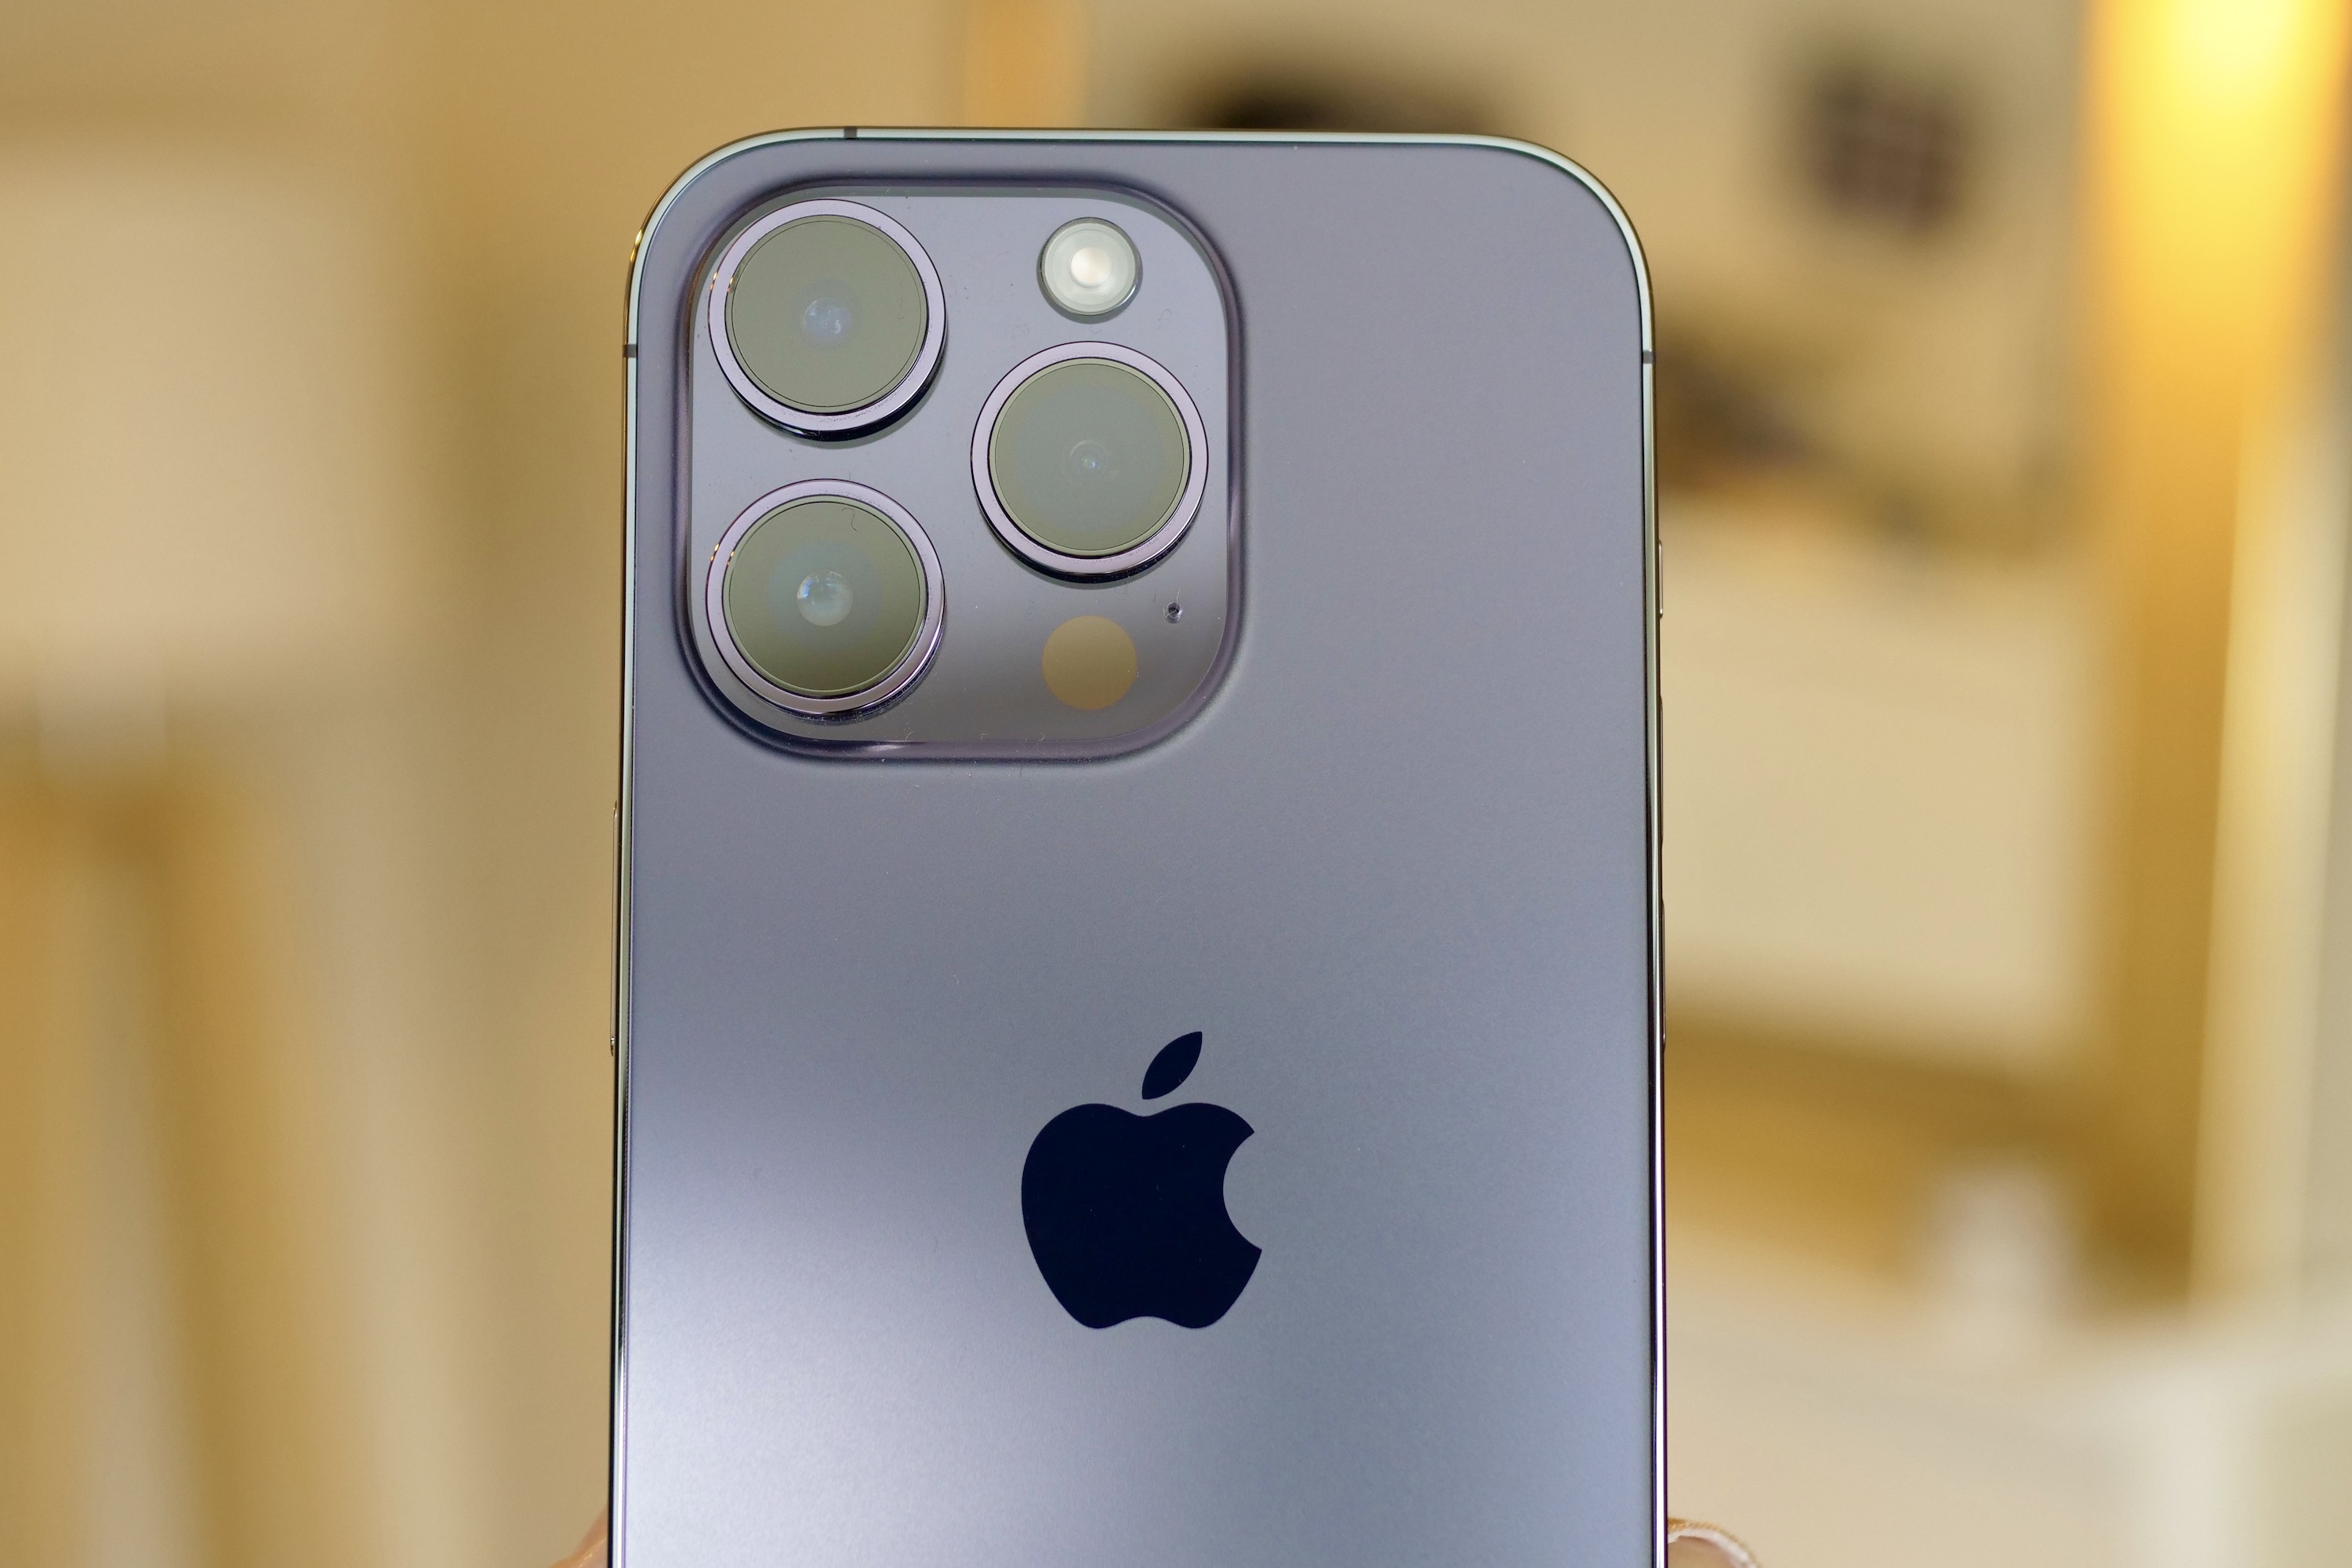 The iPhone 14 Pro is a serious leap forward for those ready to upgrade